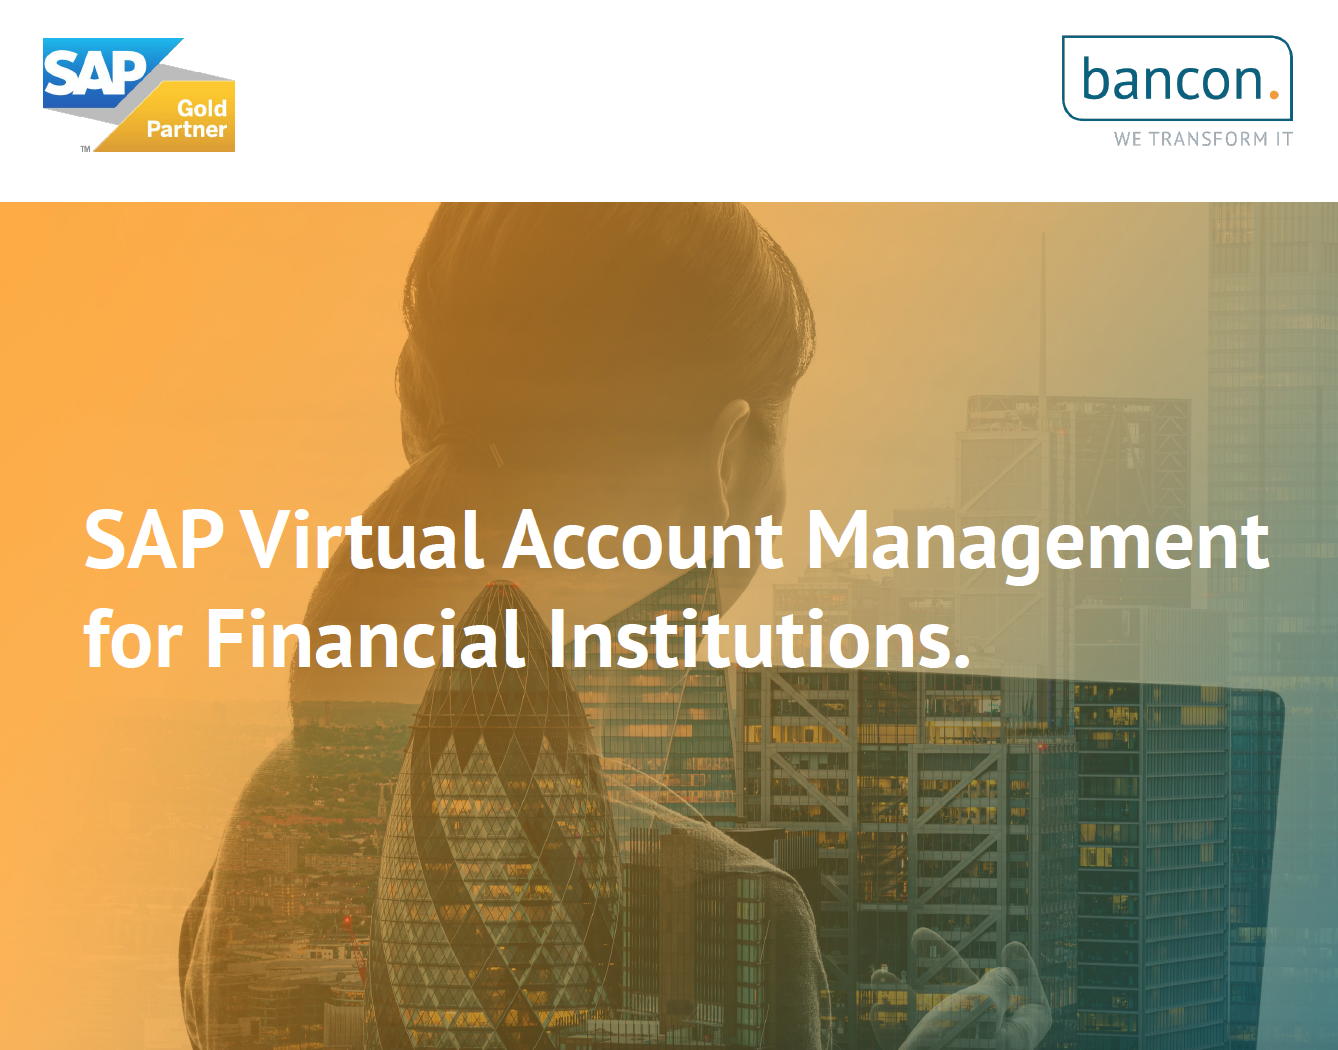 DE-sap-virtual-account-management-for-financial-institutions.md